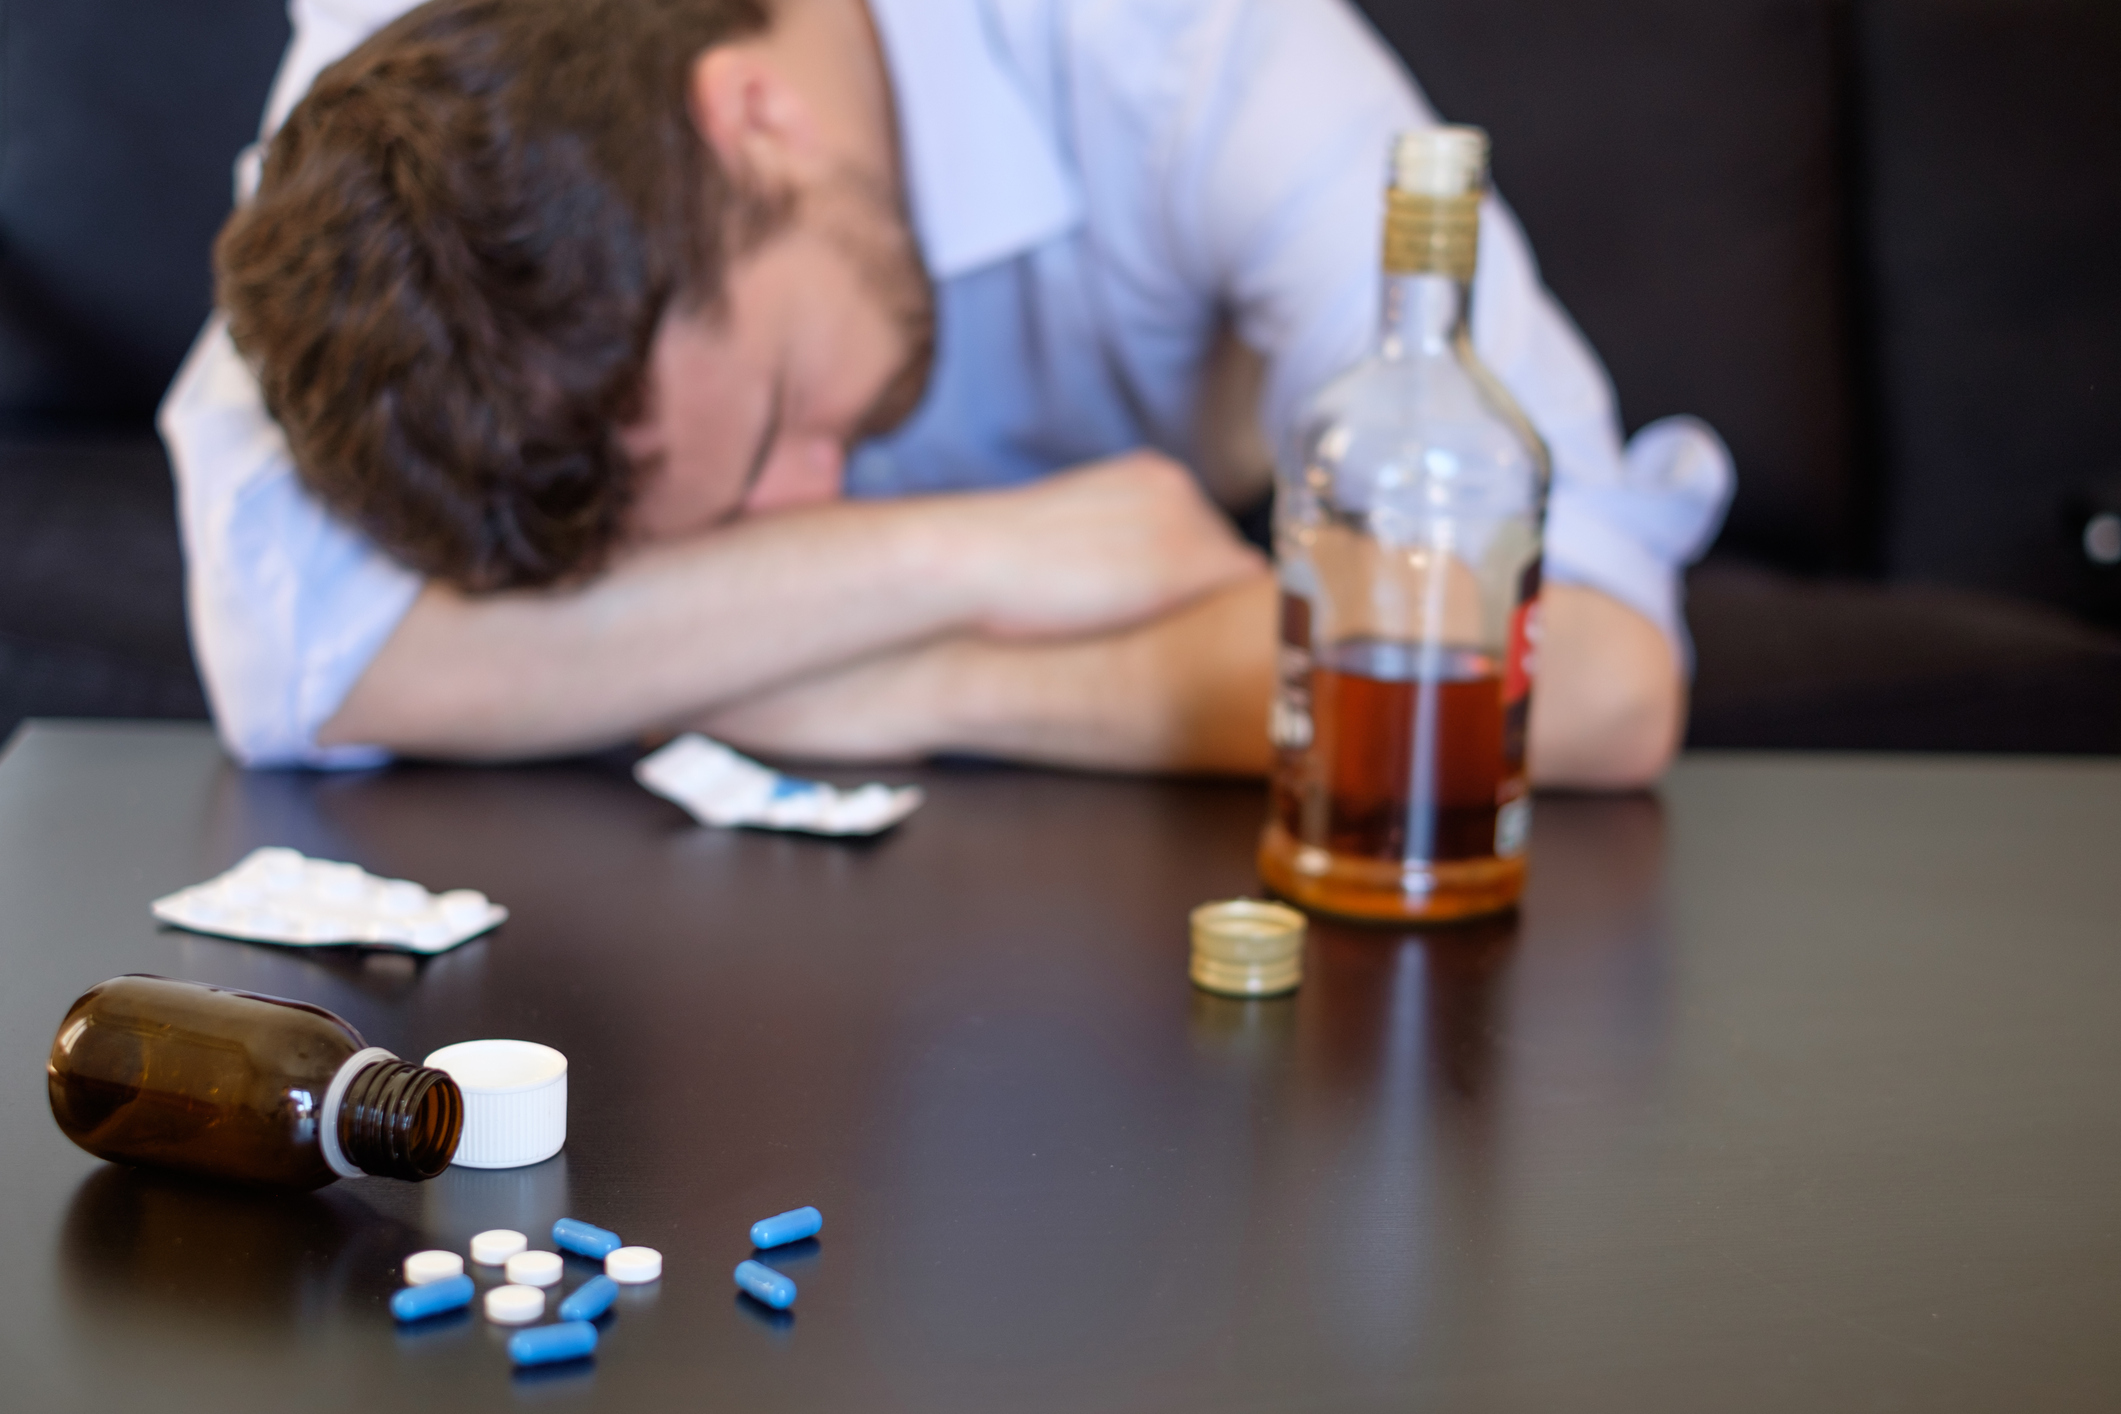 Overcoming Your Alcohol or Drug Problem